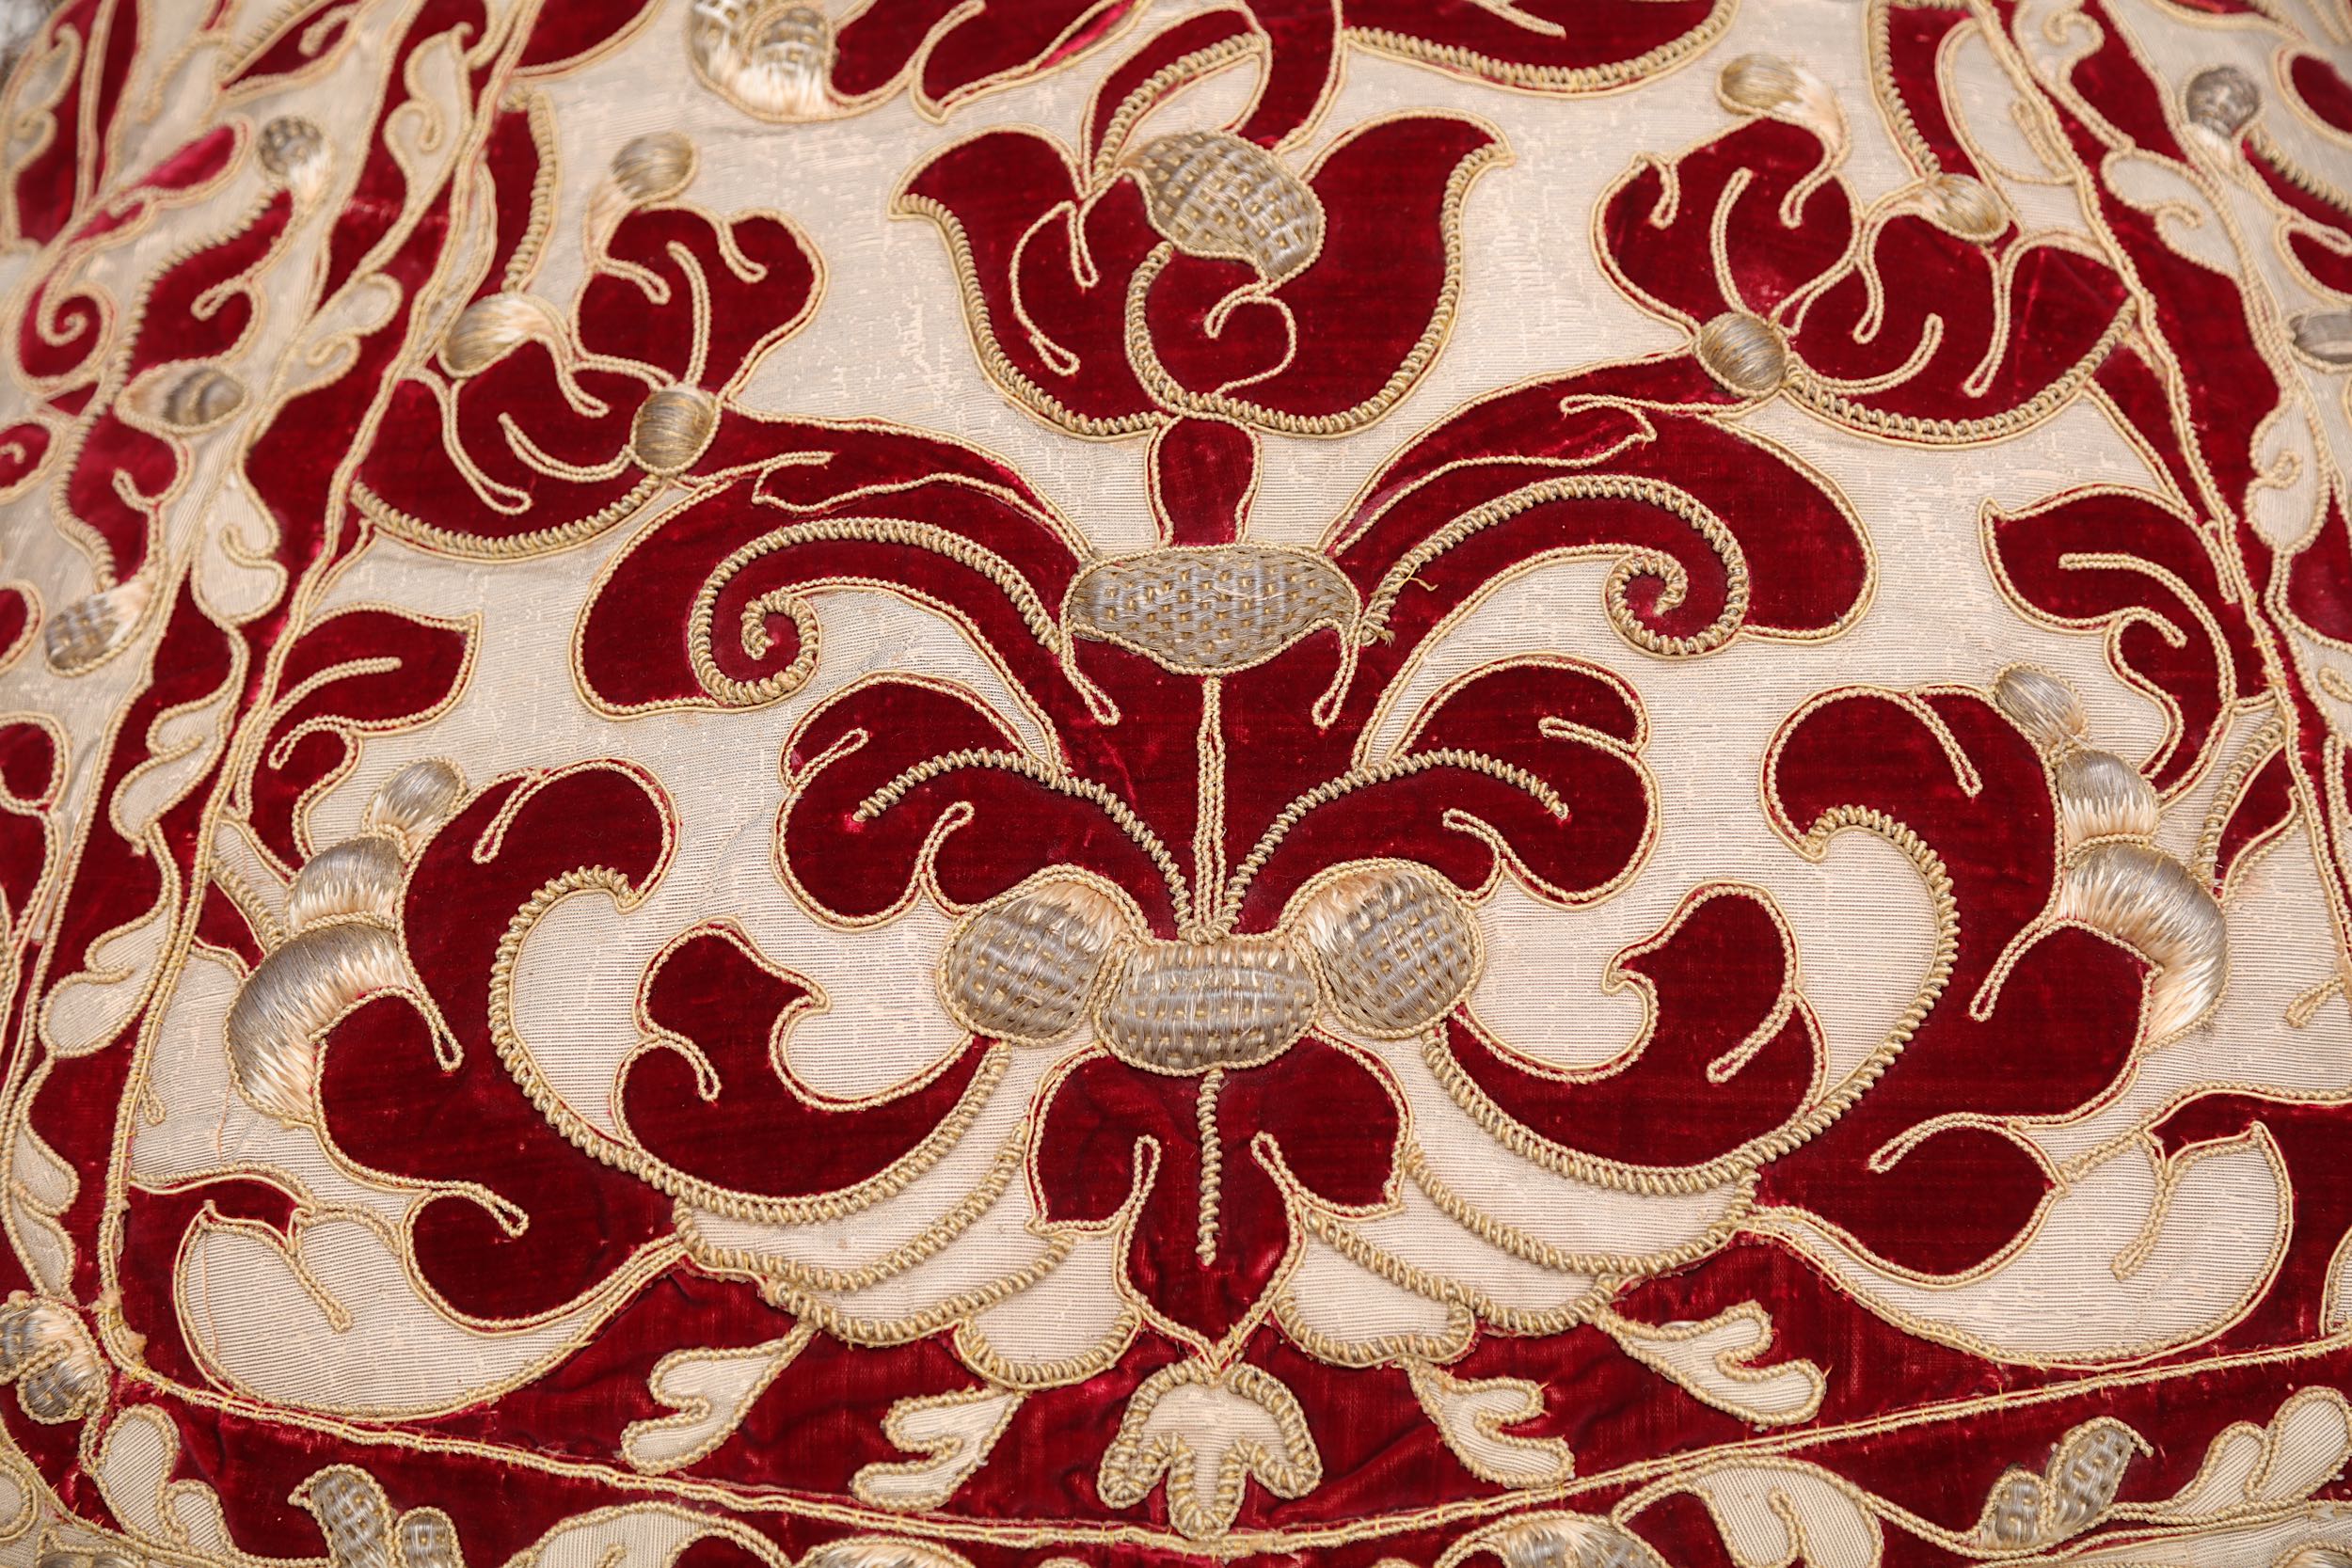 FOUR OTTOMAN-STYLE RED VELVET AND GOLD THREAD APPLIQUE CUSHIONS. - Image 2 of 5